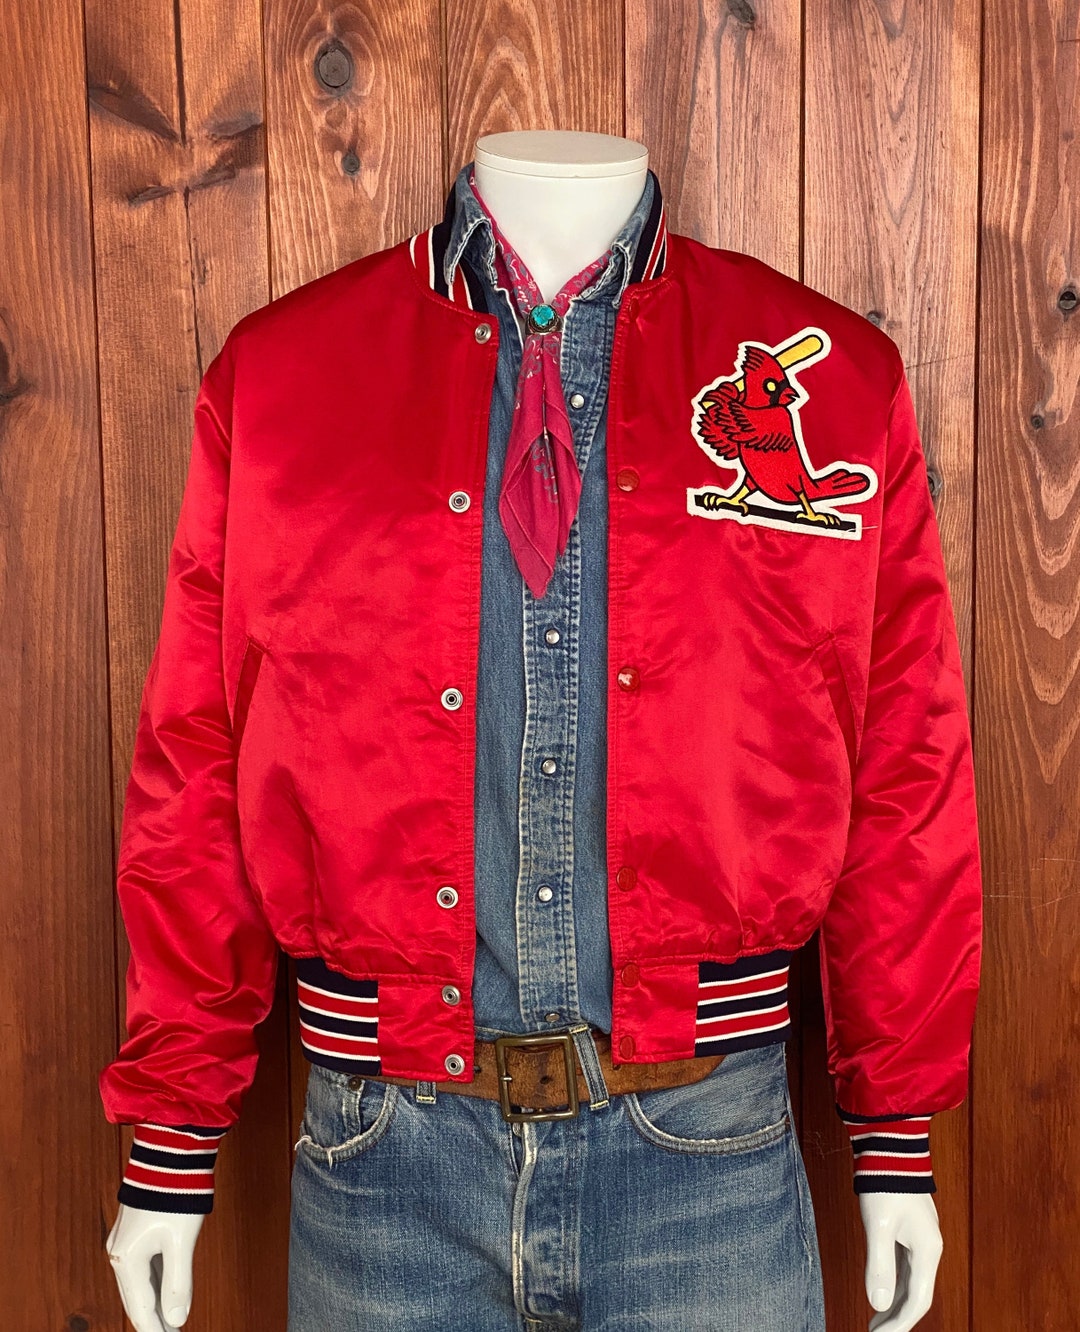 Jacket Makers St. Louis Cardinals Letterman Red Leather Jacket